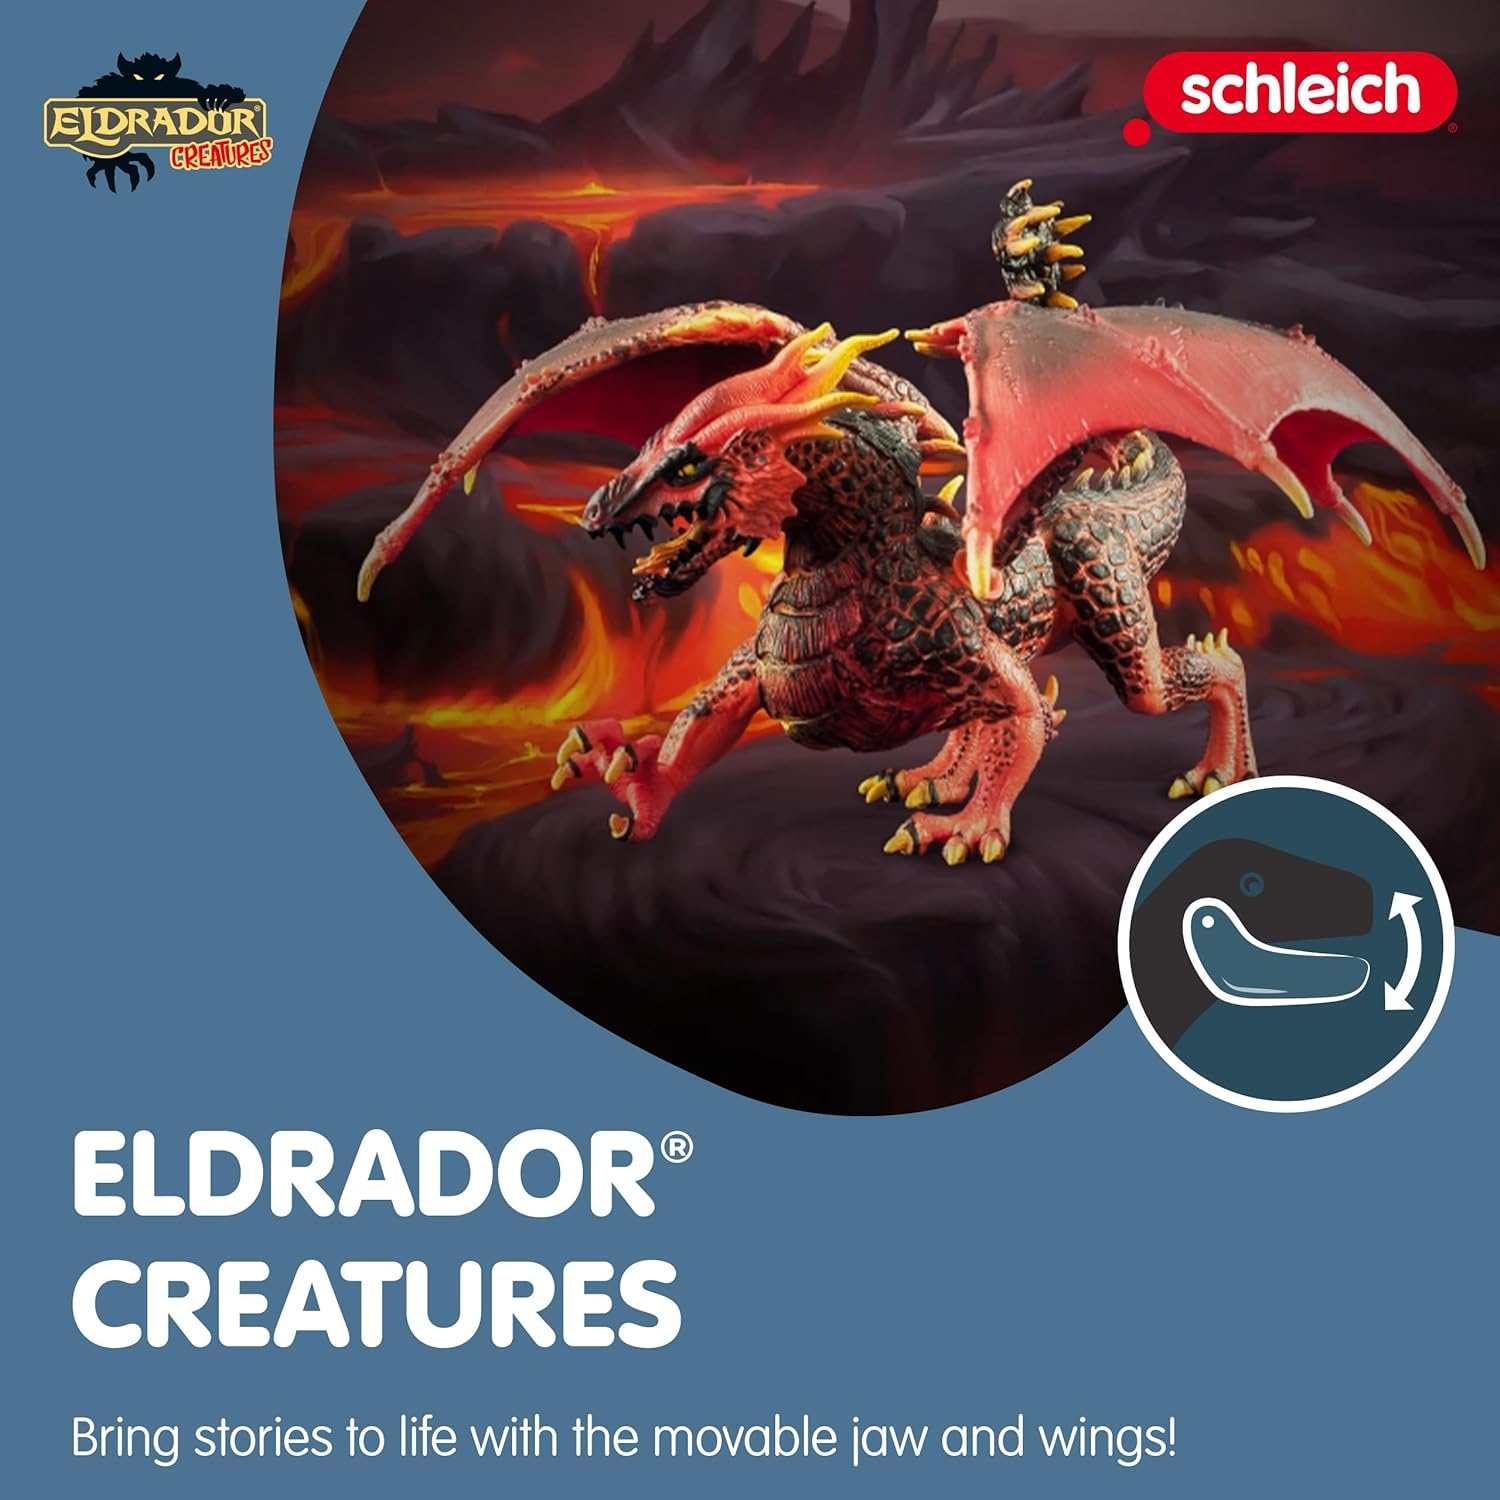 schleich ELDRADOR CREATURES - Lava Dragon, ELDRADOR CREATURES Red Dragon Toy Figurine with Moveable Wings, For Children Ages 7+